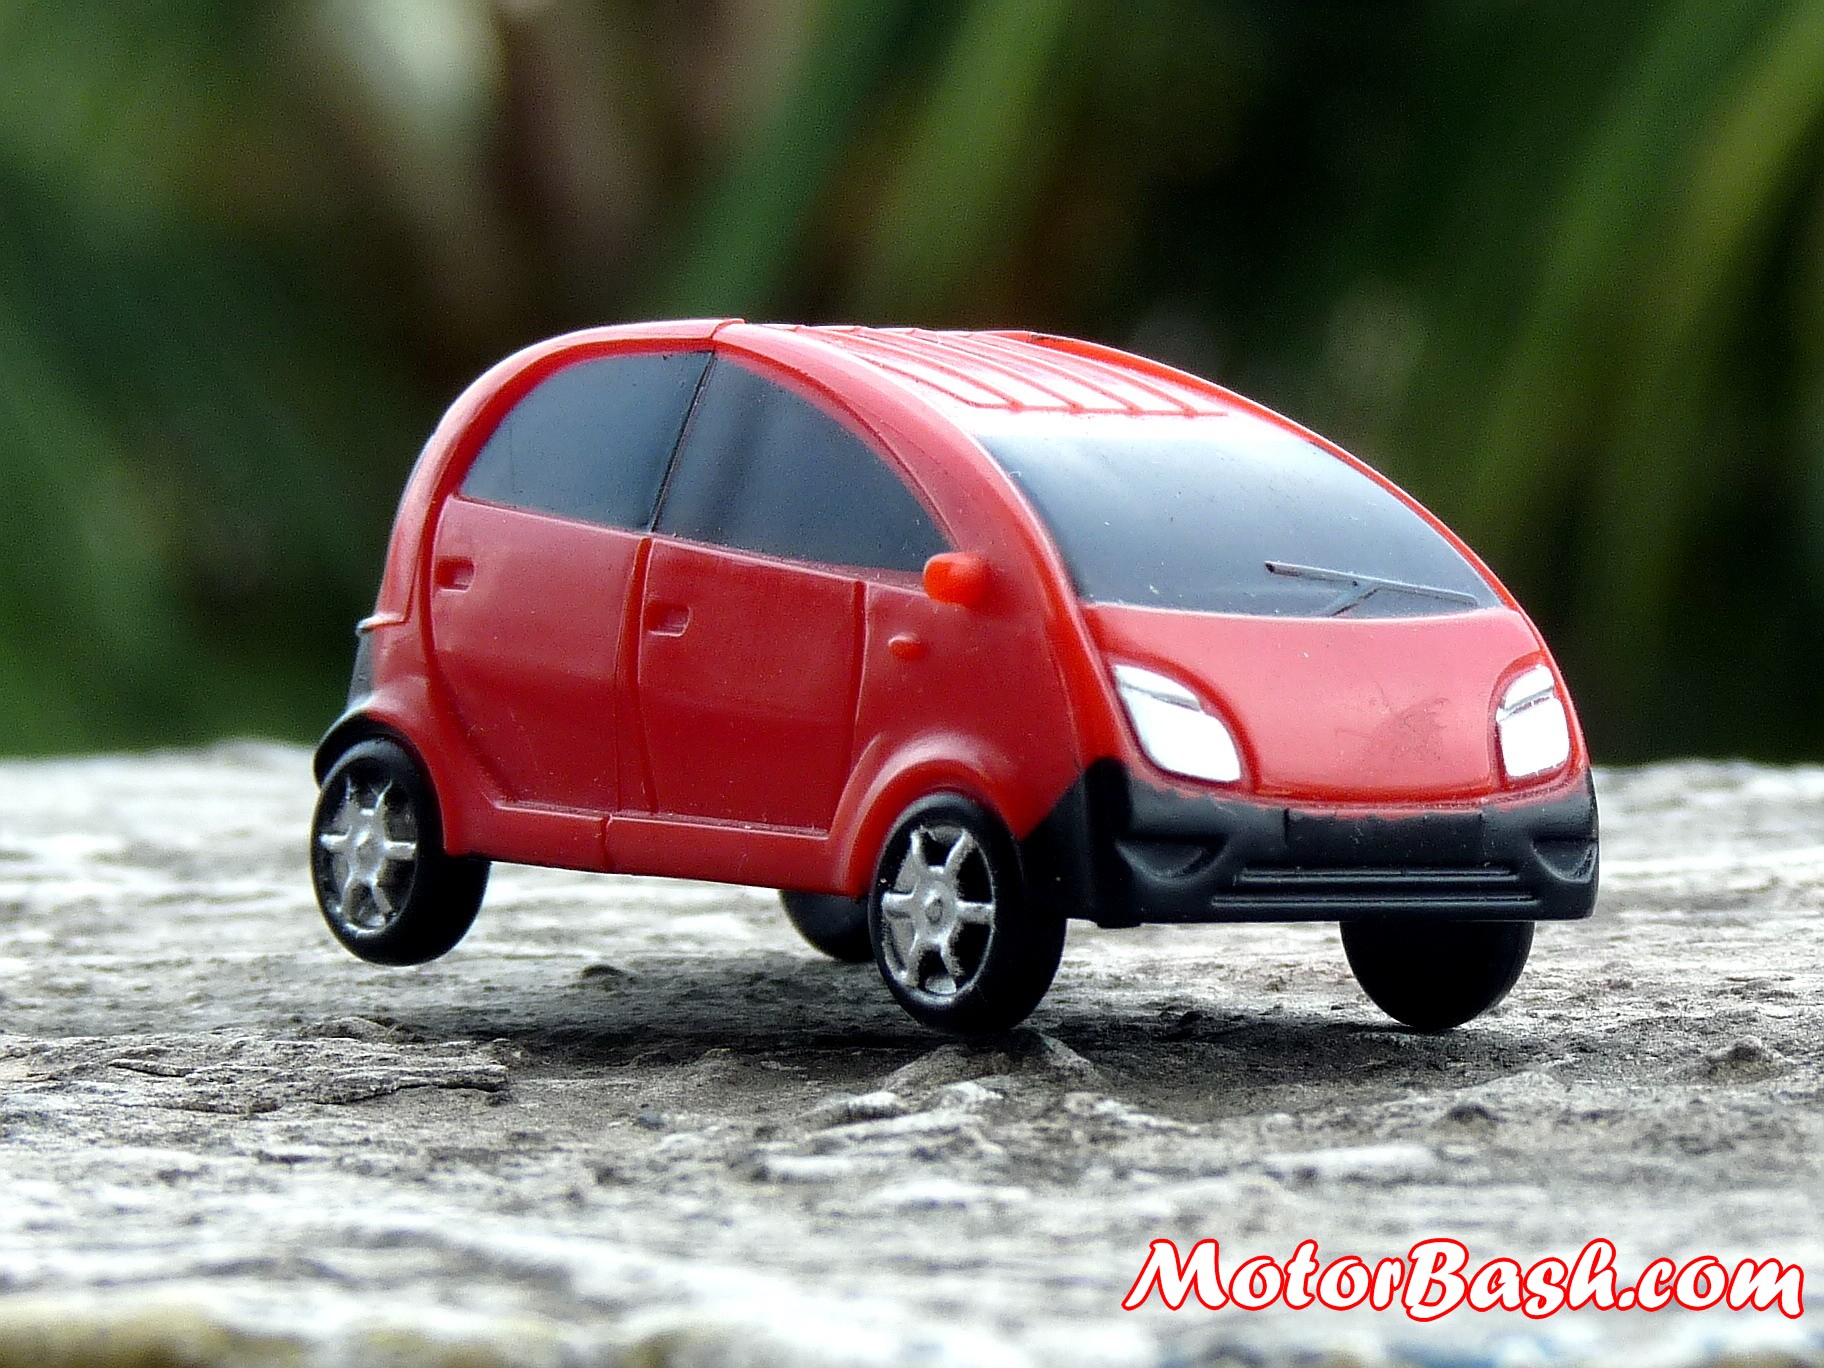 Tata Launches Online Ebay Store for Nano, Have you shopped yet?